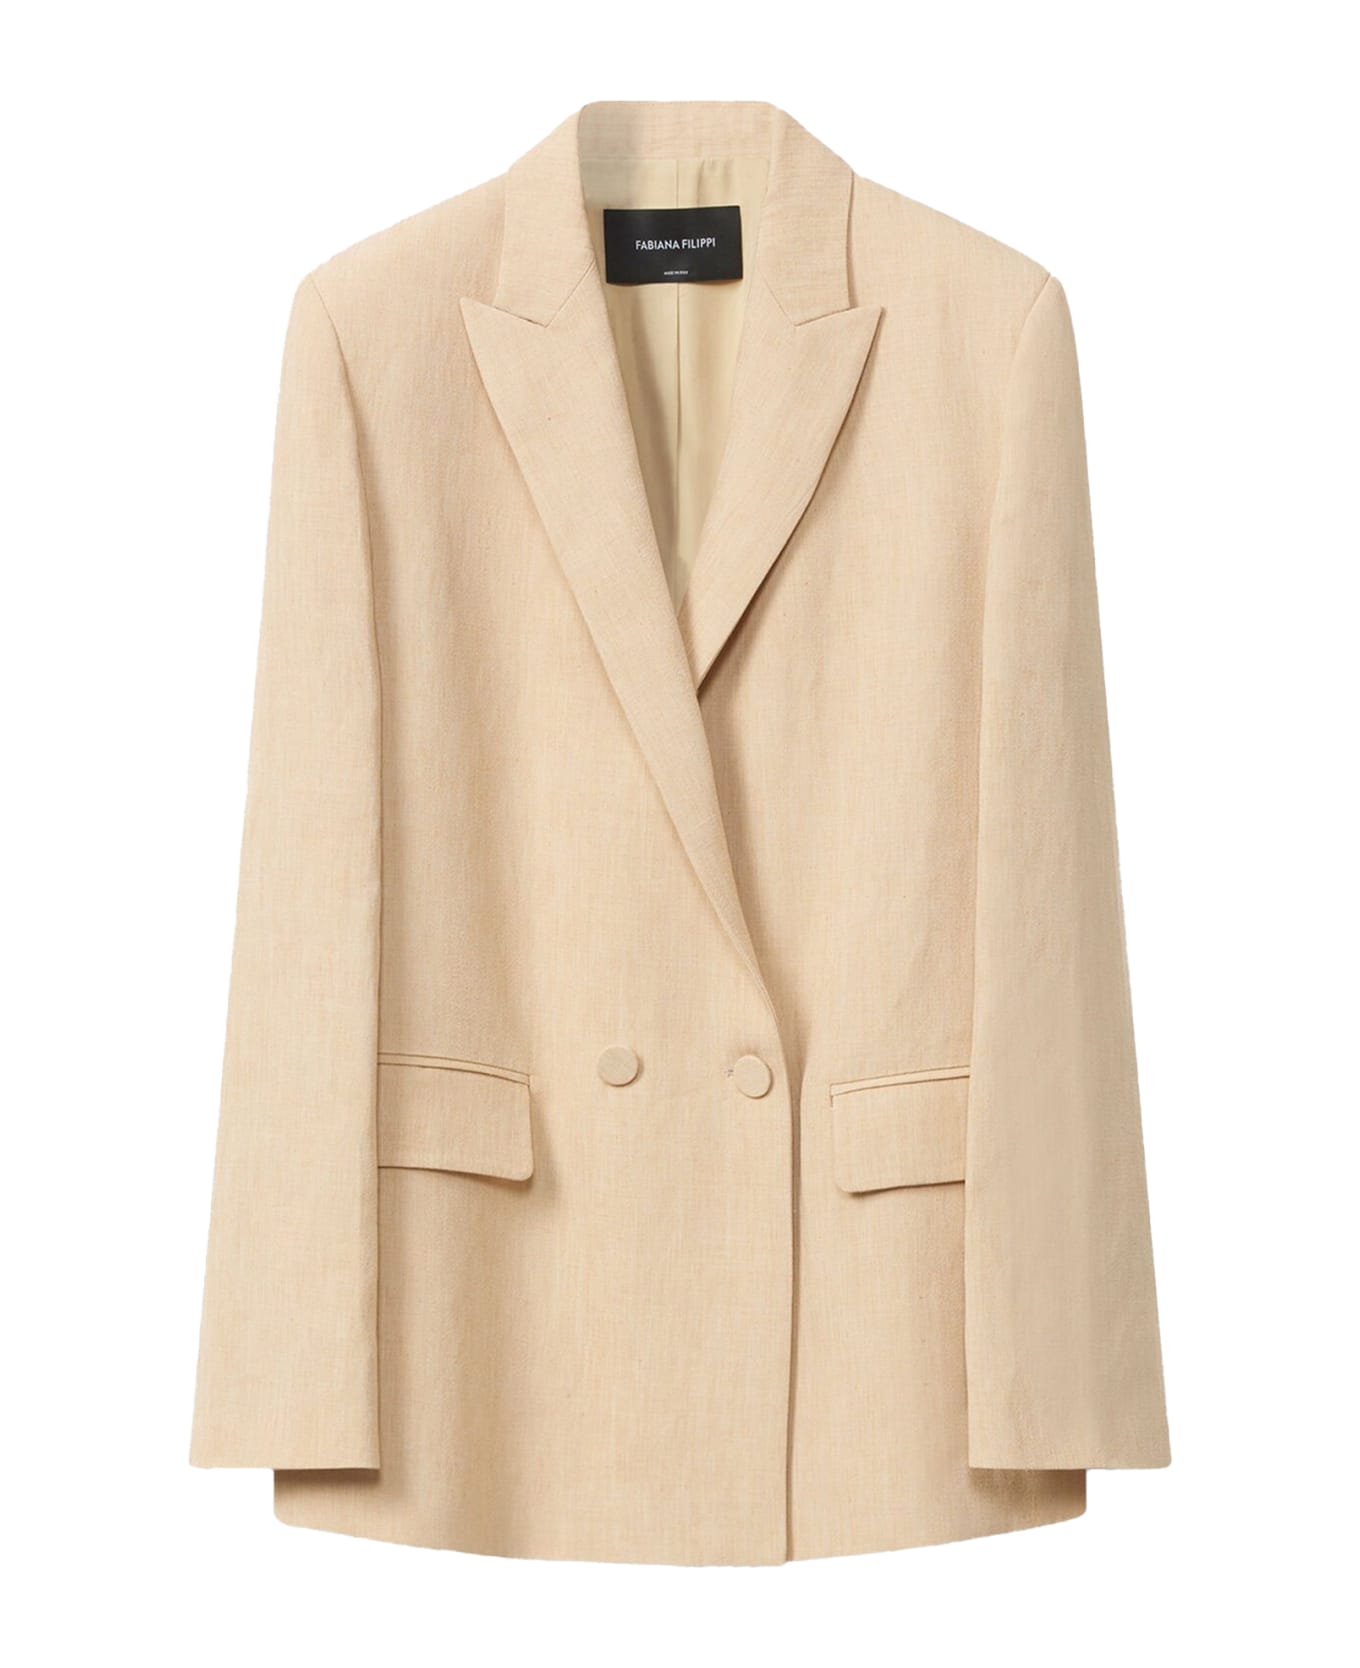 Fabiana Filippi Double-breasted Jacket In Linen And Viscose Blend